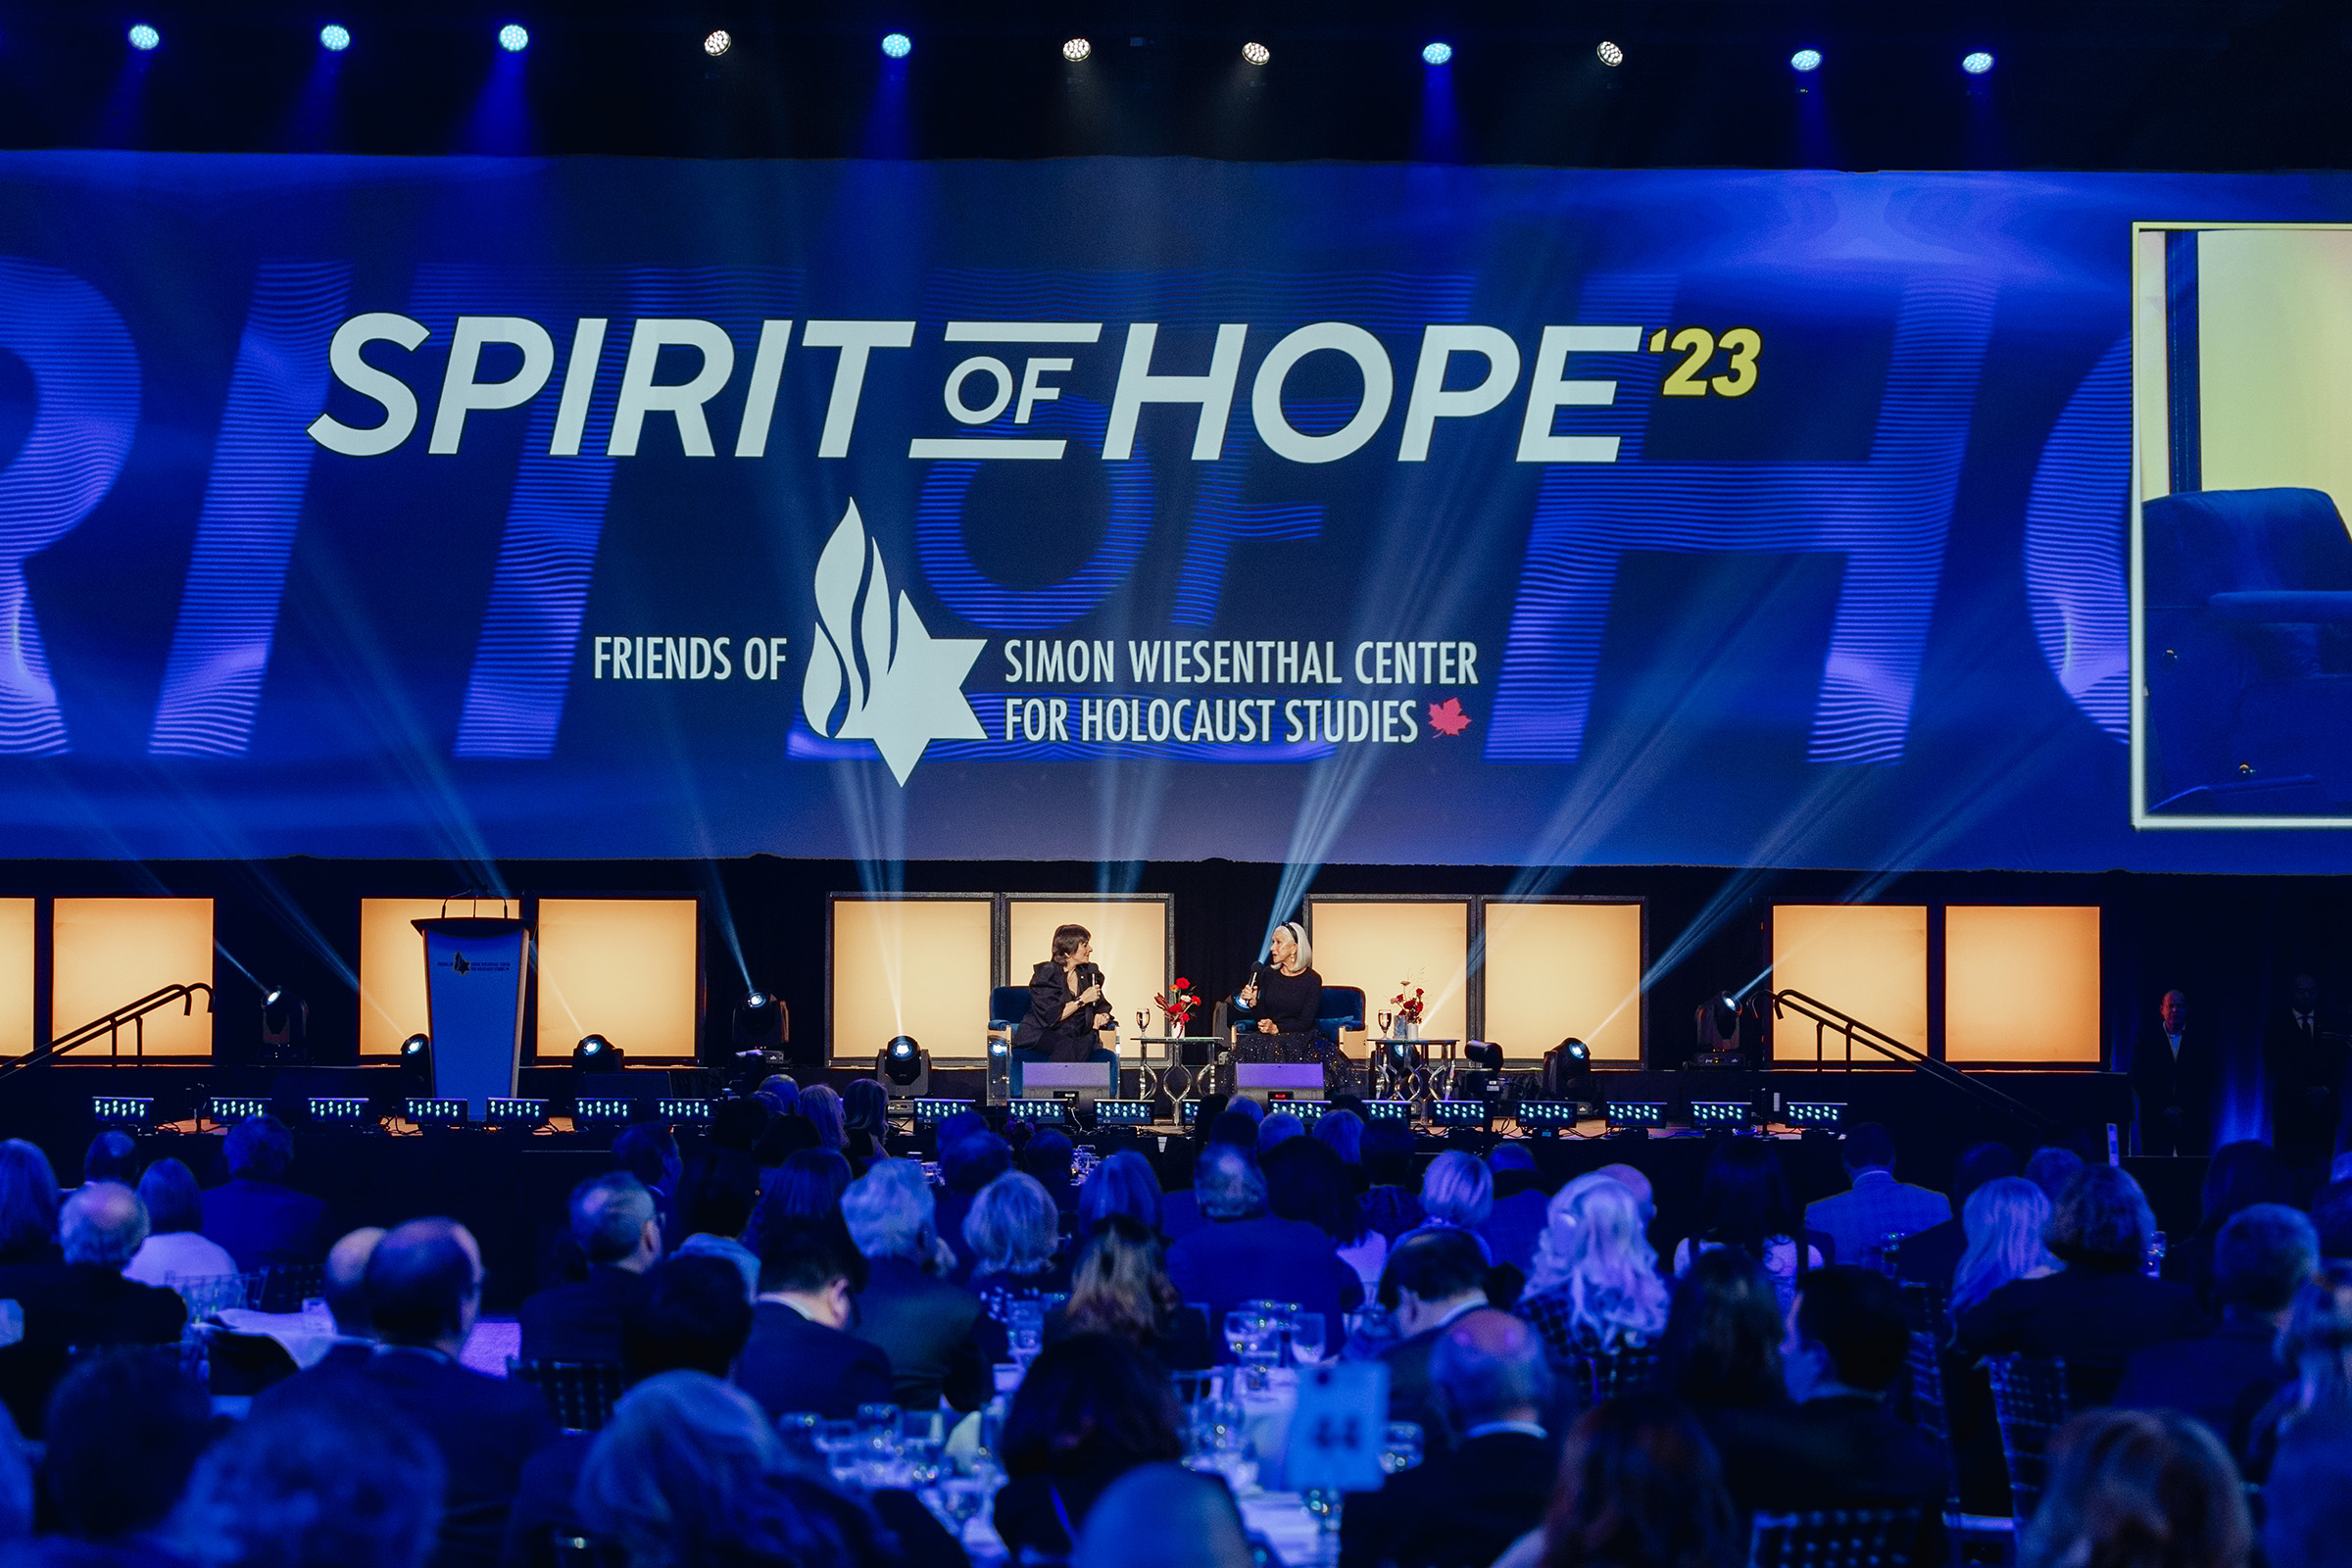 Spirit of hope 22 is a platform for content creation and the embodiment of limitless possibilities. With a focus on creating meaningful and inspiring digital content, Spirit of hope 22 seeks to ignite the spark within